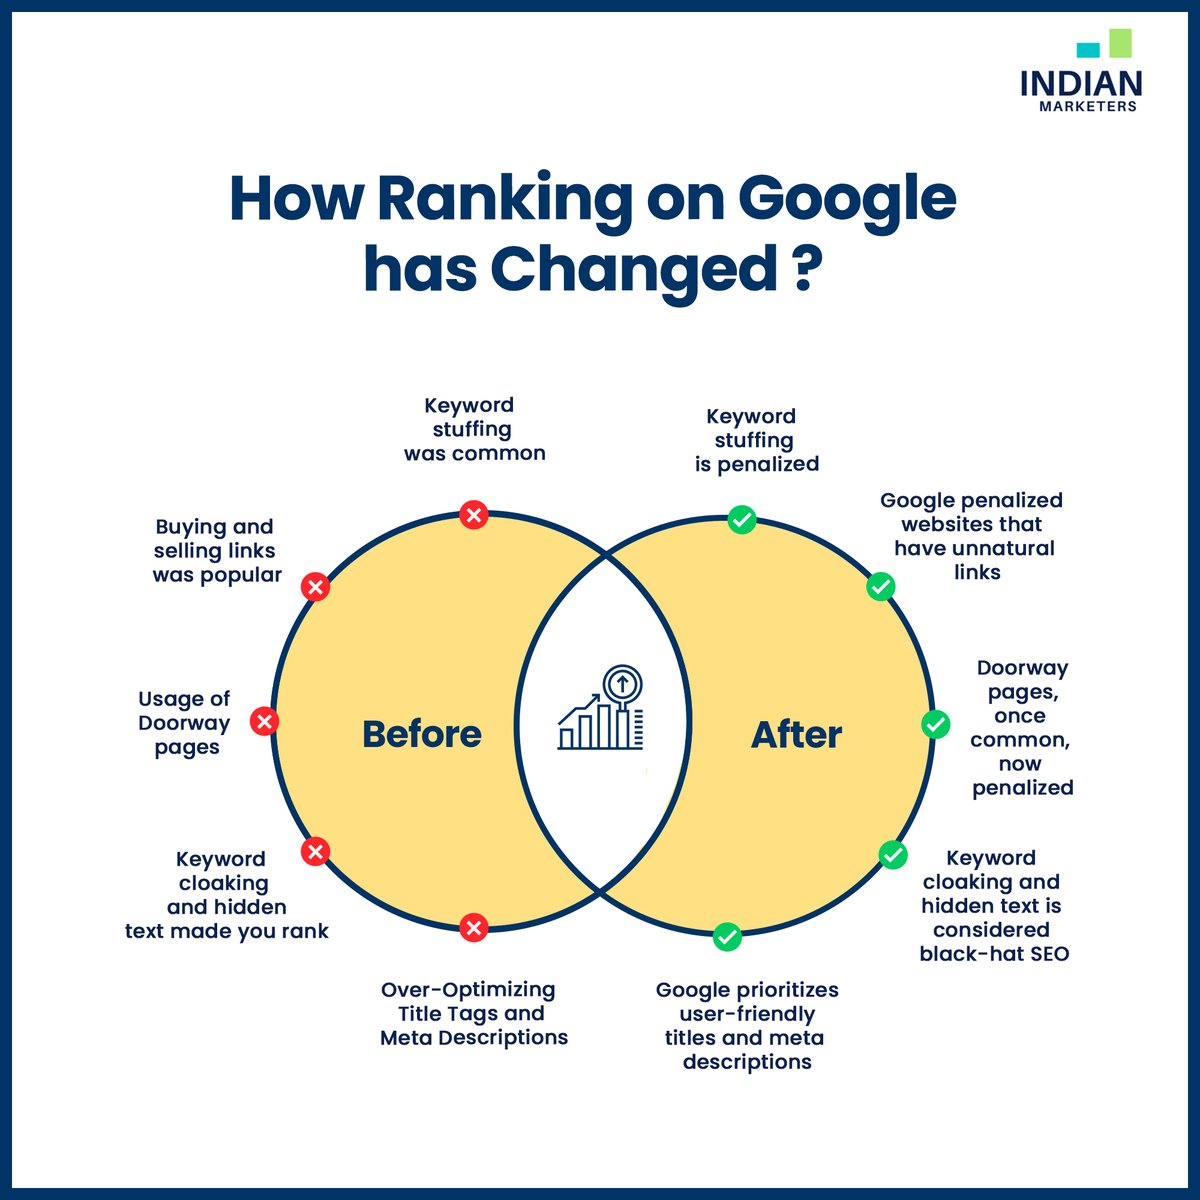 Gone are the days of keyword stuffing and black-hat tactics. Google has evolved, and so has SEO.    #indianmarketers #seotips #thenvsnow #googlerankings #digitalmarketing